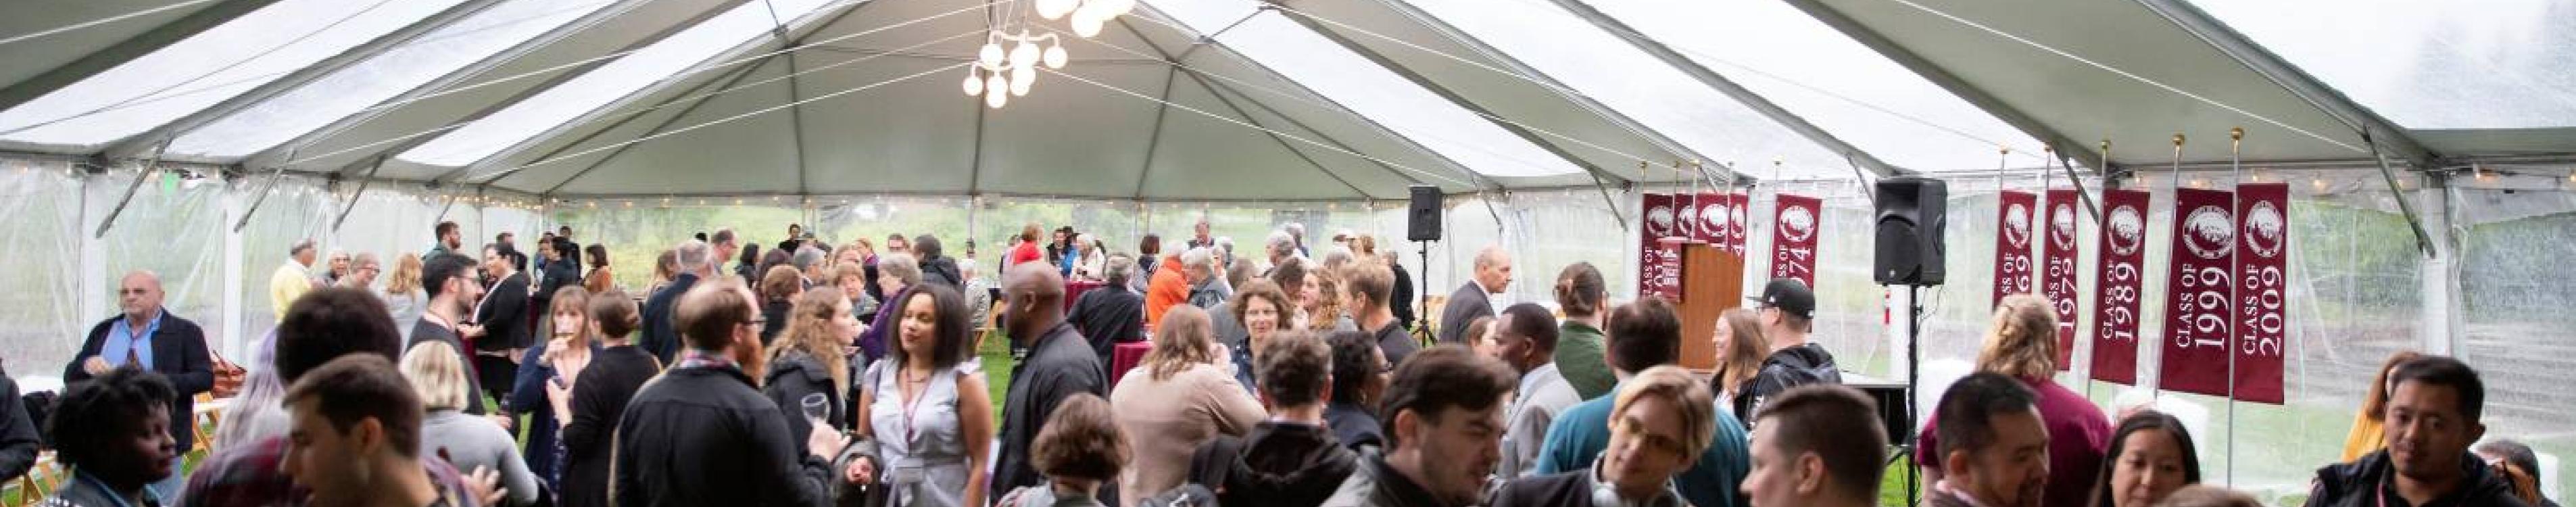 Attendees at an event in a marquee on the lawn